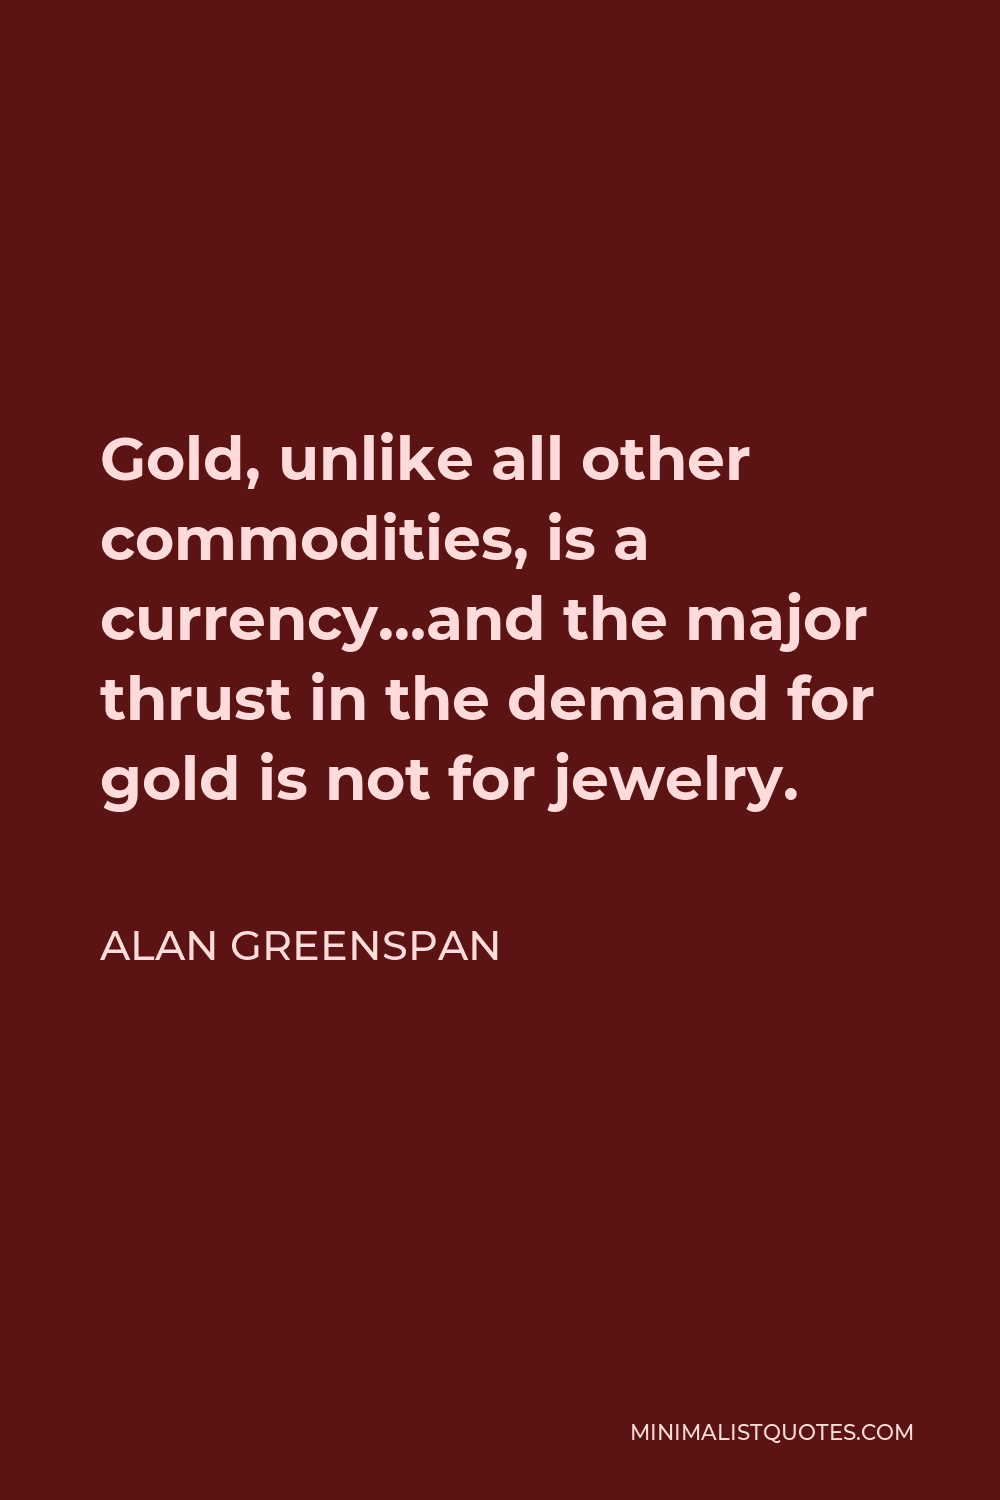 Alan Greenspan Quote - Gold, unlike all other commodities, is a currency…and the major thrust in the demand for gold is not for jewelry.